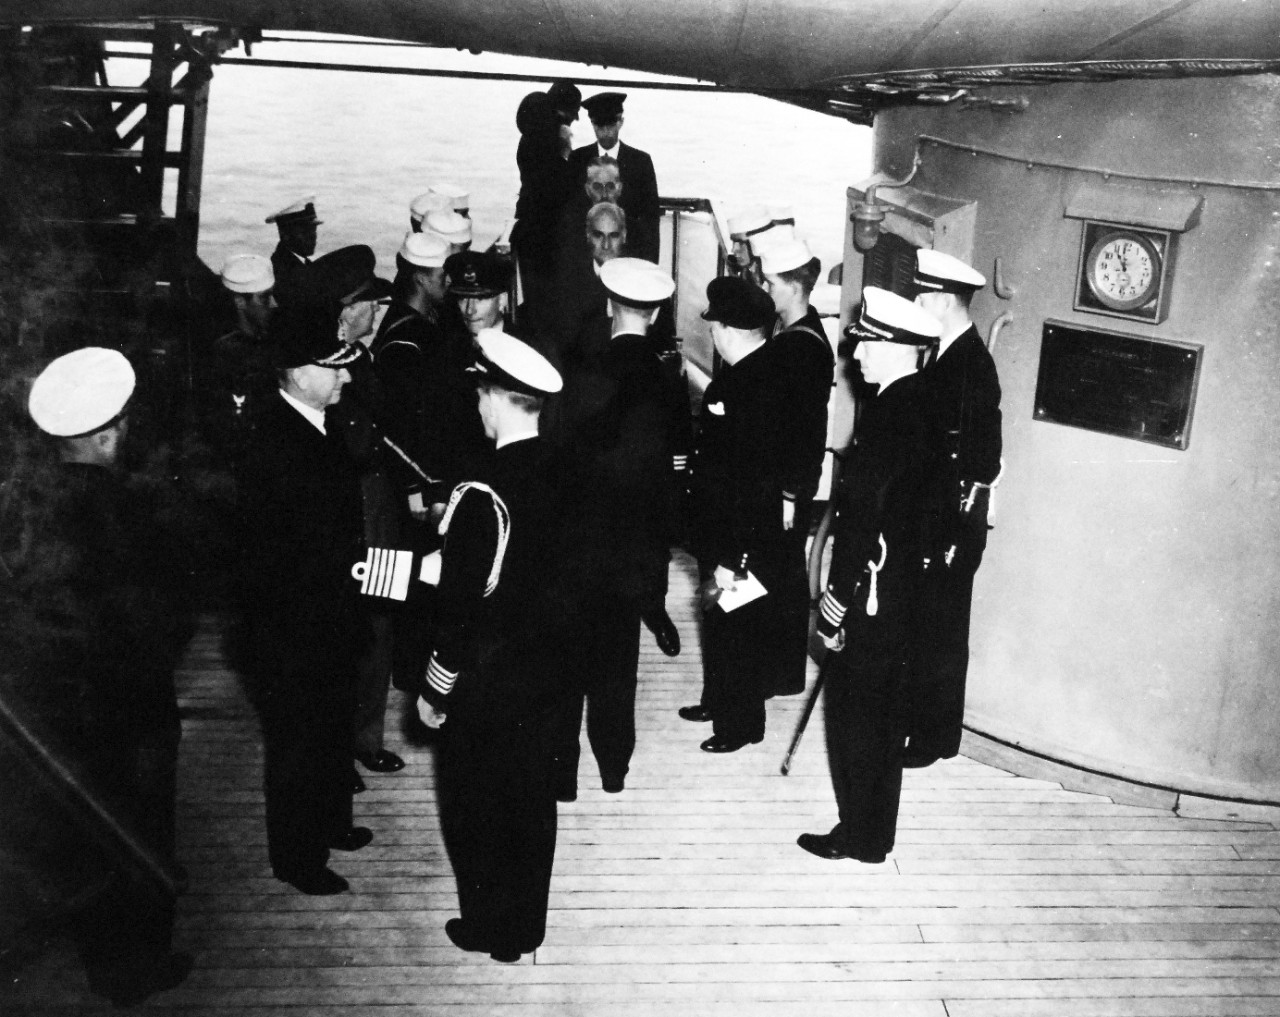 80-G-26858: Atlantic Charter, August 1941.  Prime Minister Winston S. Churchill and party coming onboard USS Augusta (CA-31) during the Atlantic Charter meeting.   Photograph released August 1941.   Official U.S. Navy Photograph, now in the collections of the National Archives.  (2016/03/22).